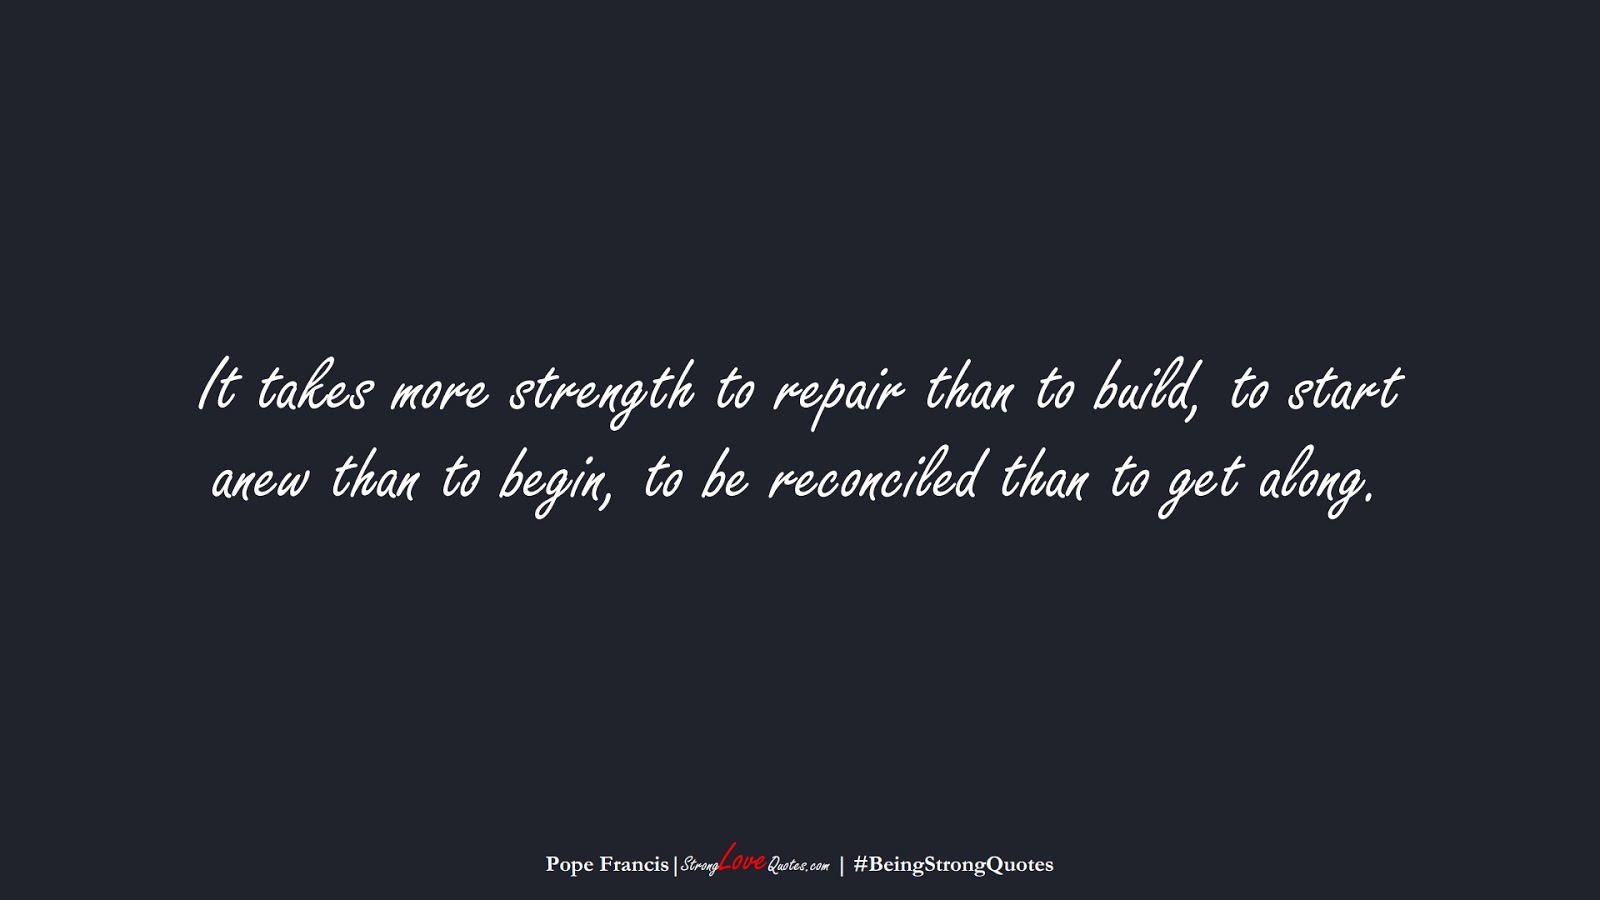 It takes more strength to repair than to build, to start anew than to begin, to be reconciled than to get along. (Pope Francis);  #BeingStrongQuotes